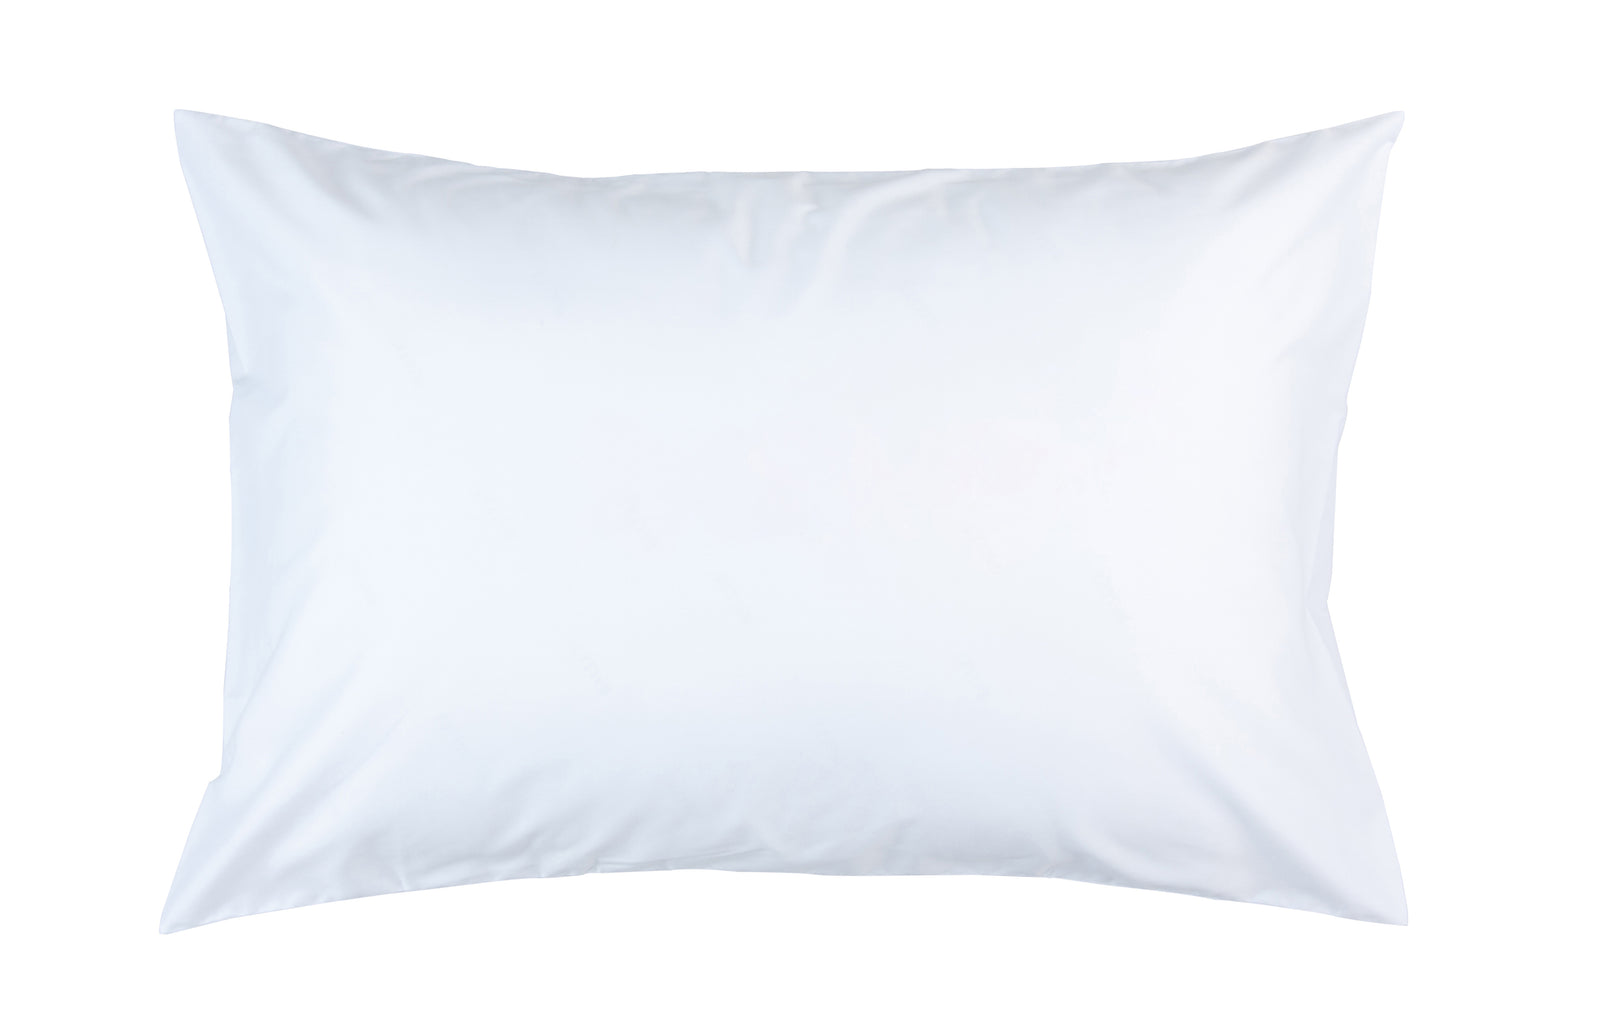 2X FIRM Density Micro-Down Your Bed Pillow